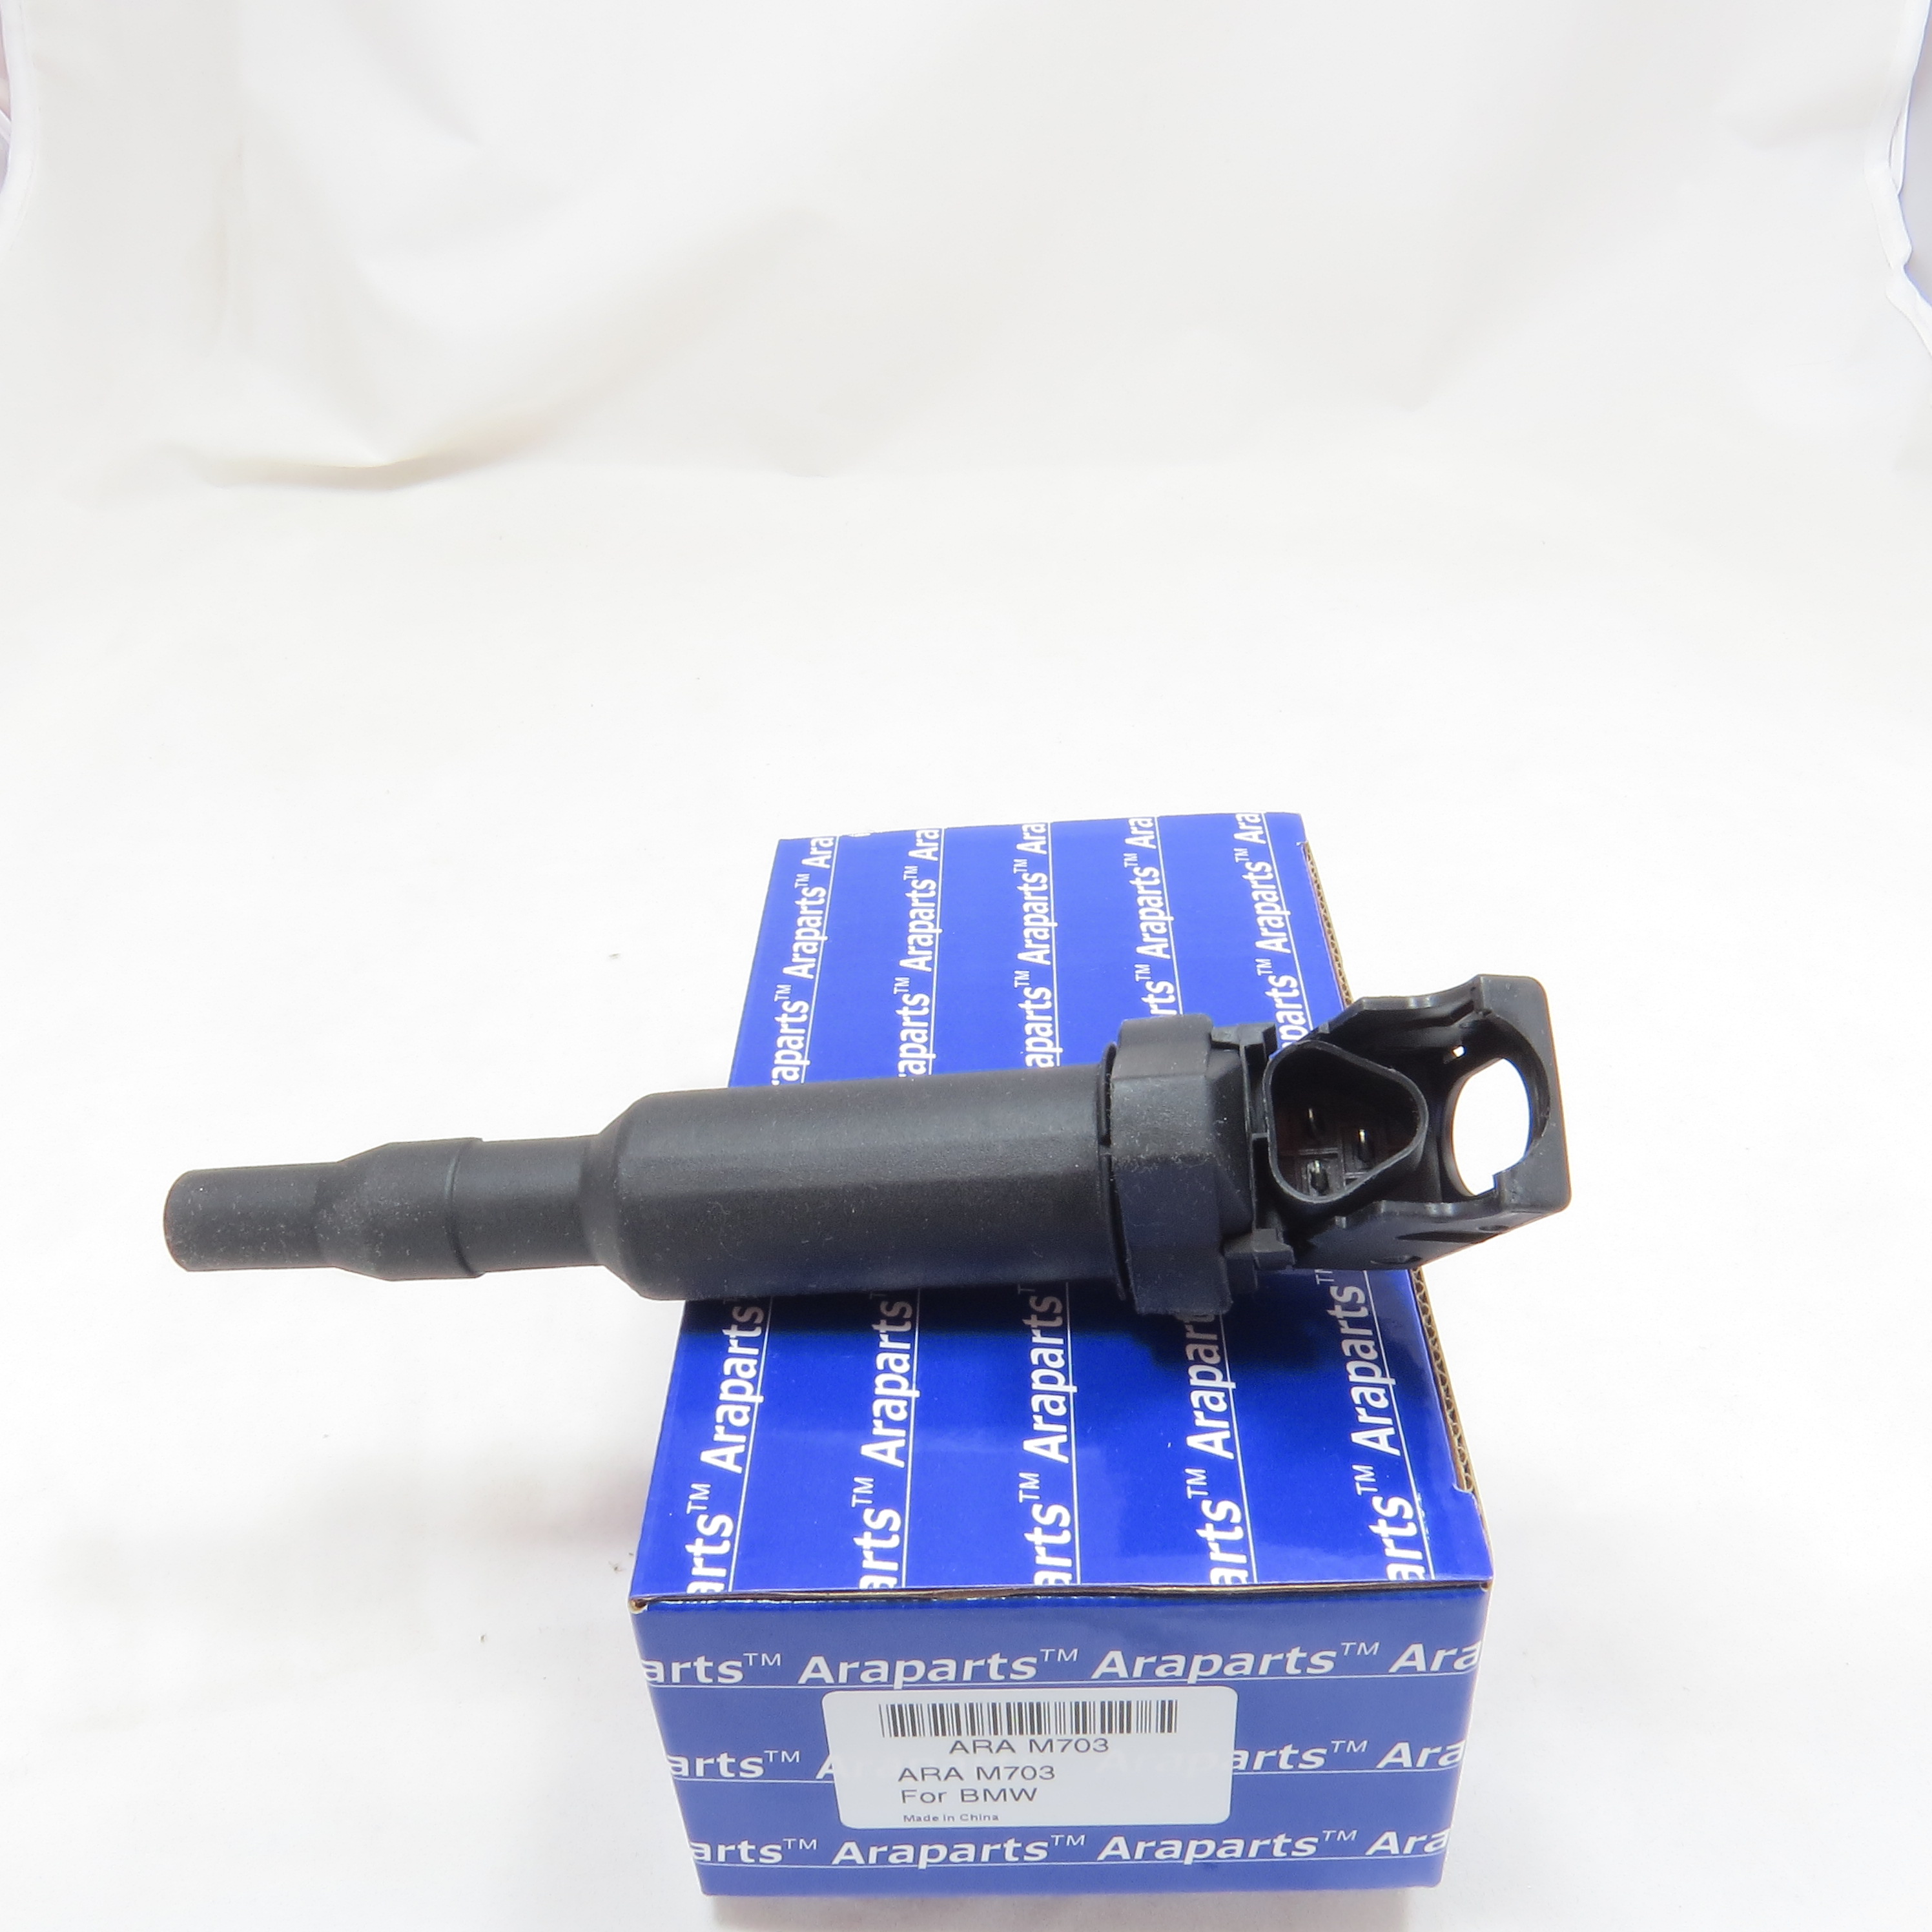 Pictured here is an Ignition Coil for a 2007 BMW 328xi AWD